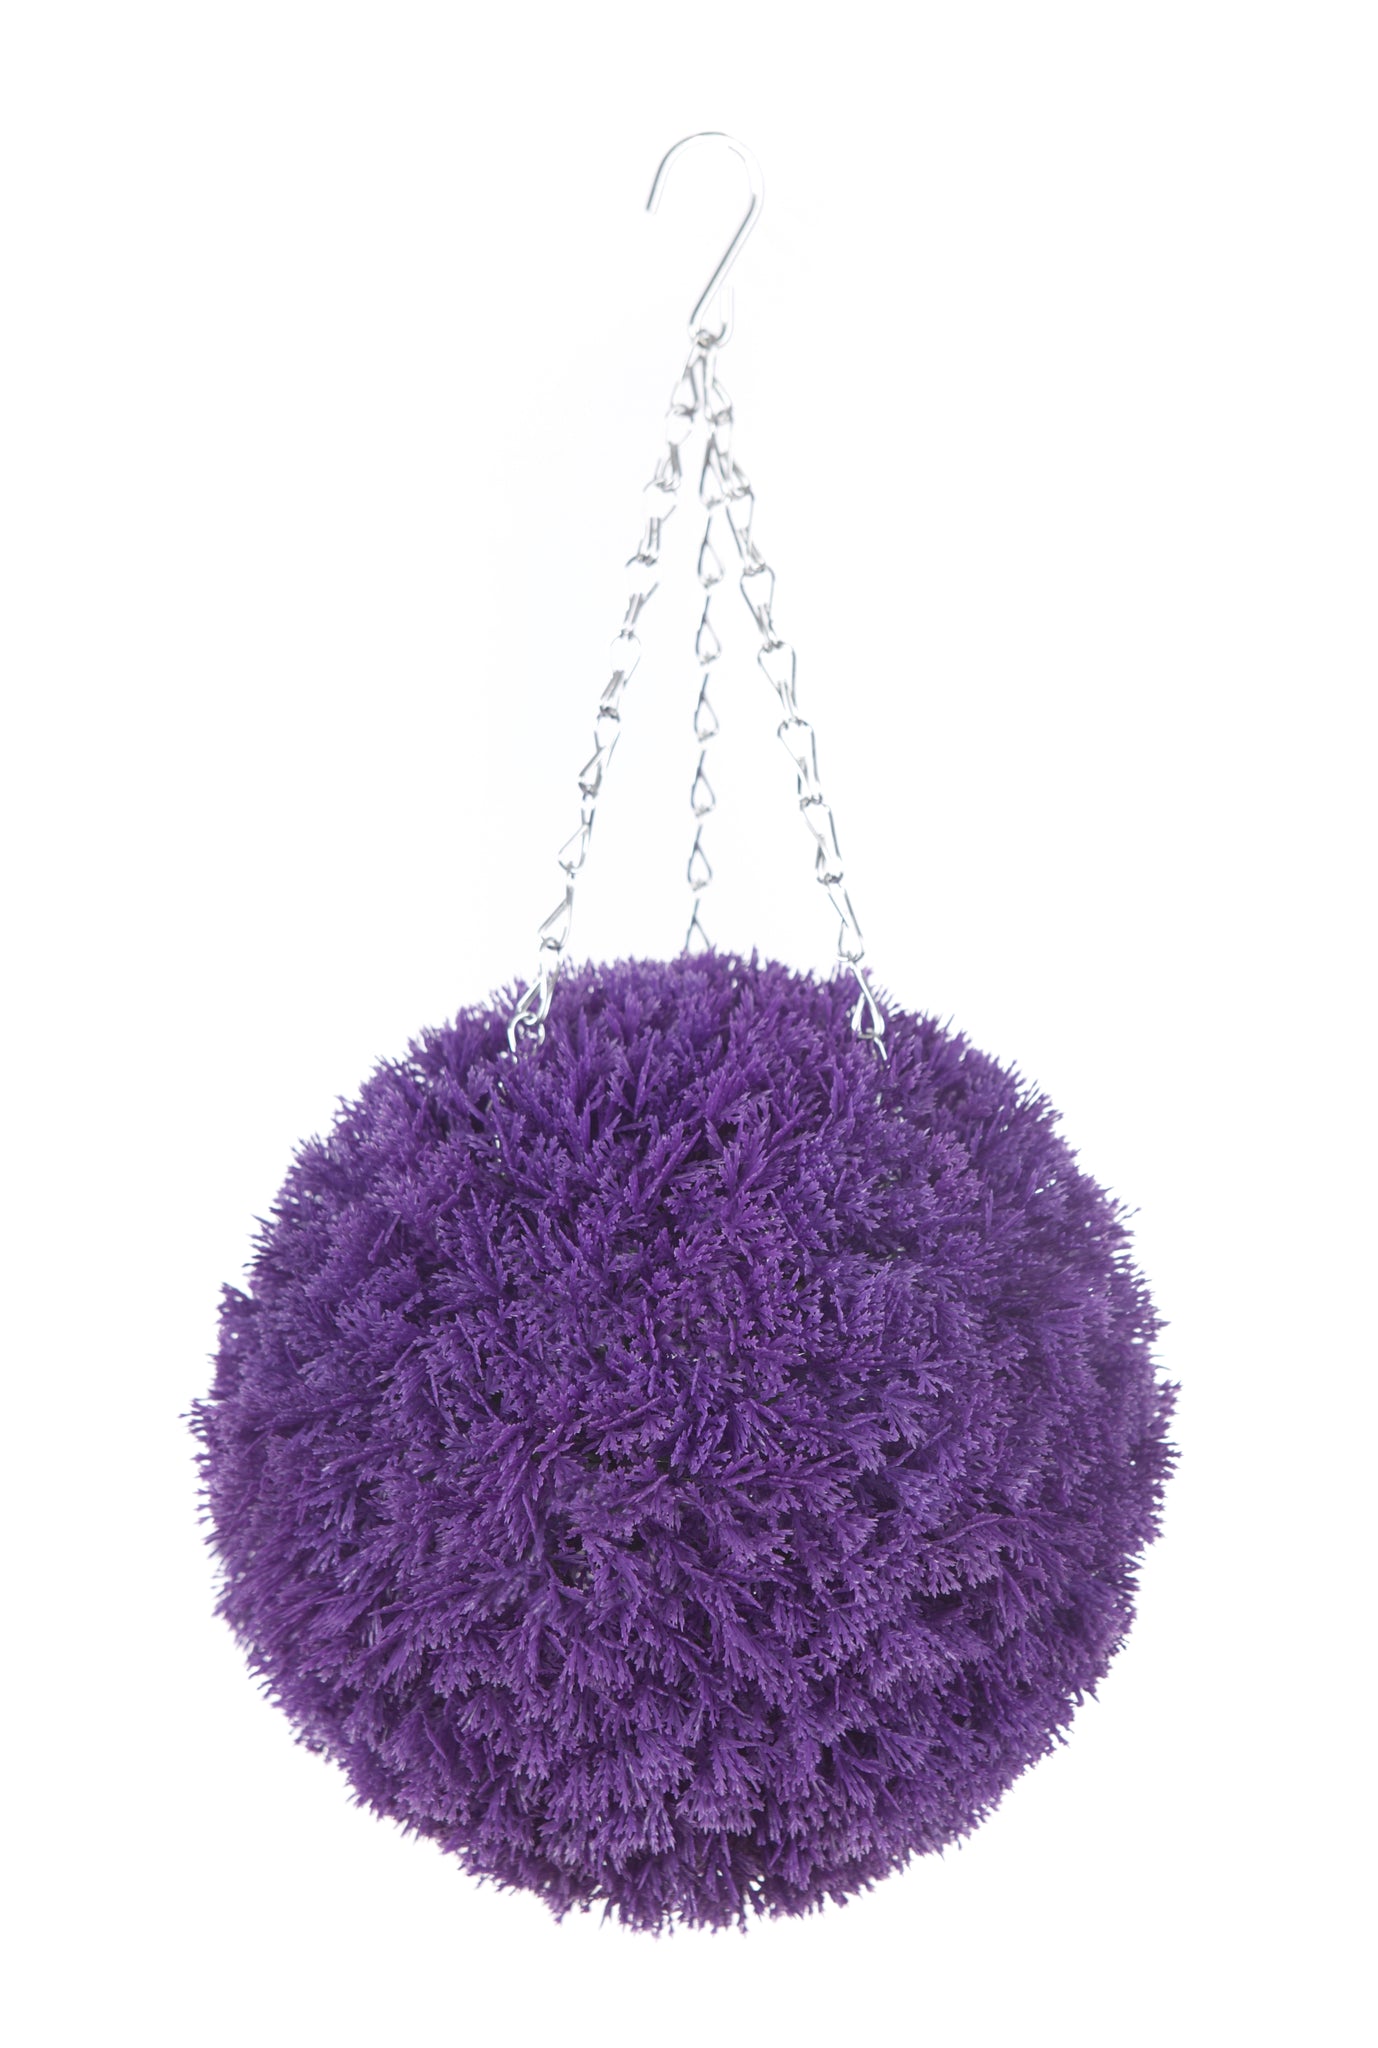 Best Artificial 28cm Purple Heather Topiary Ball